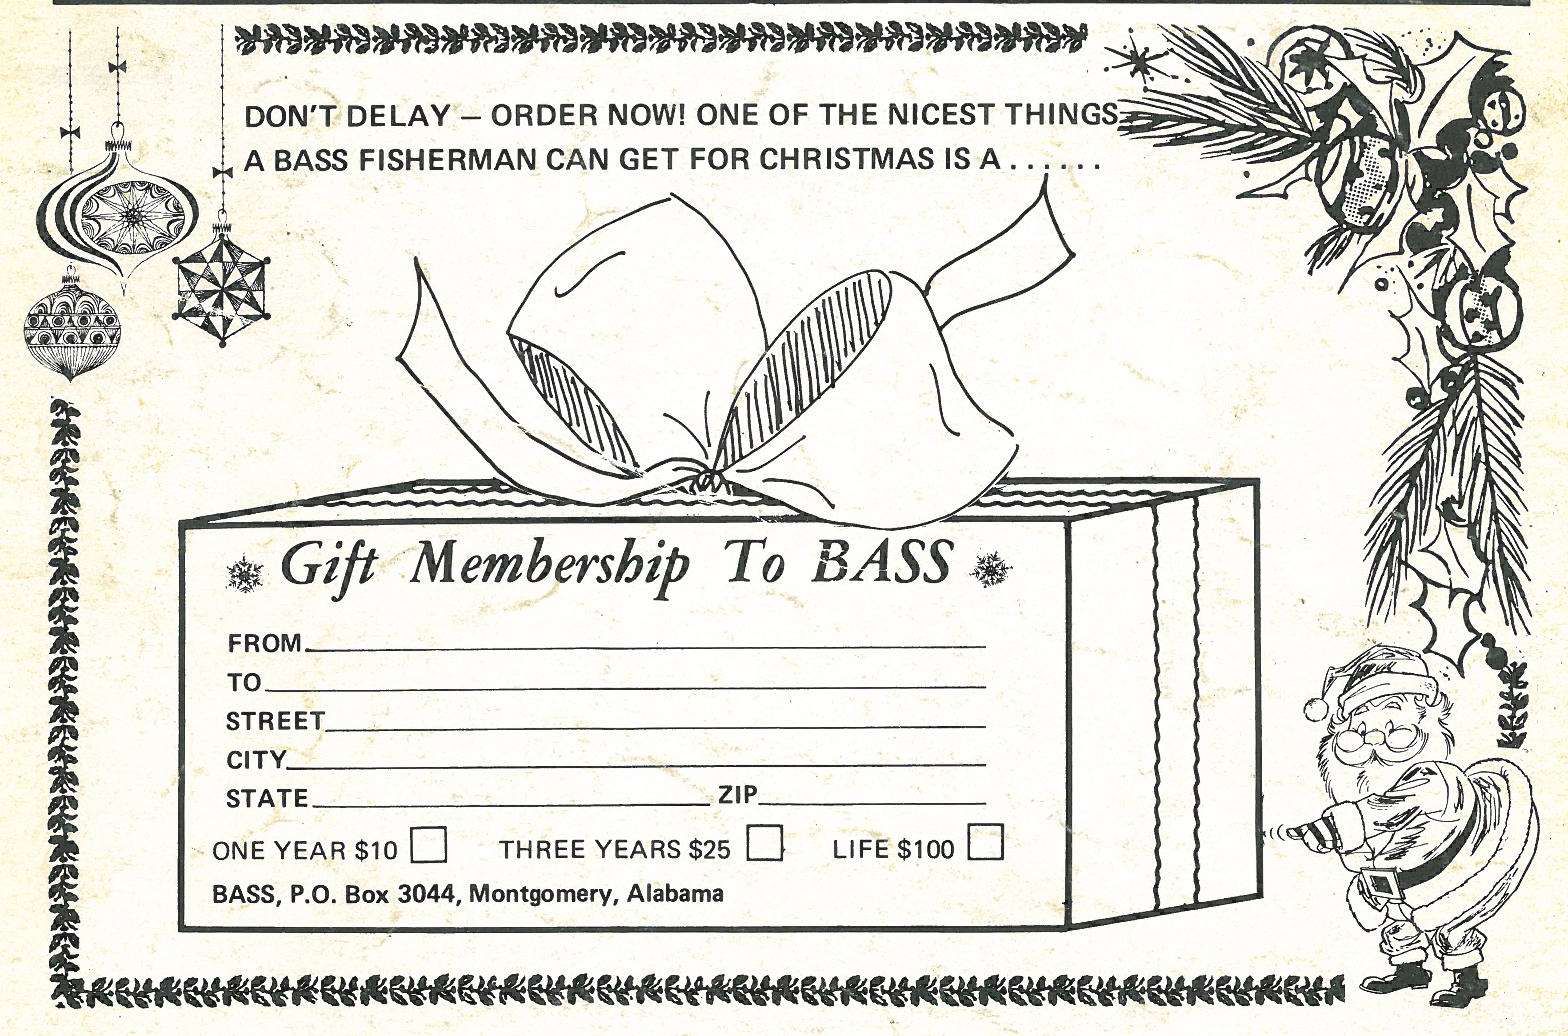 Finally, the winter issue's back cover promotes giving the gift of B.A.S.S. membership for Christmas. In the first year of B.A.S.S., membership grew to a total of 2,000.